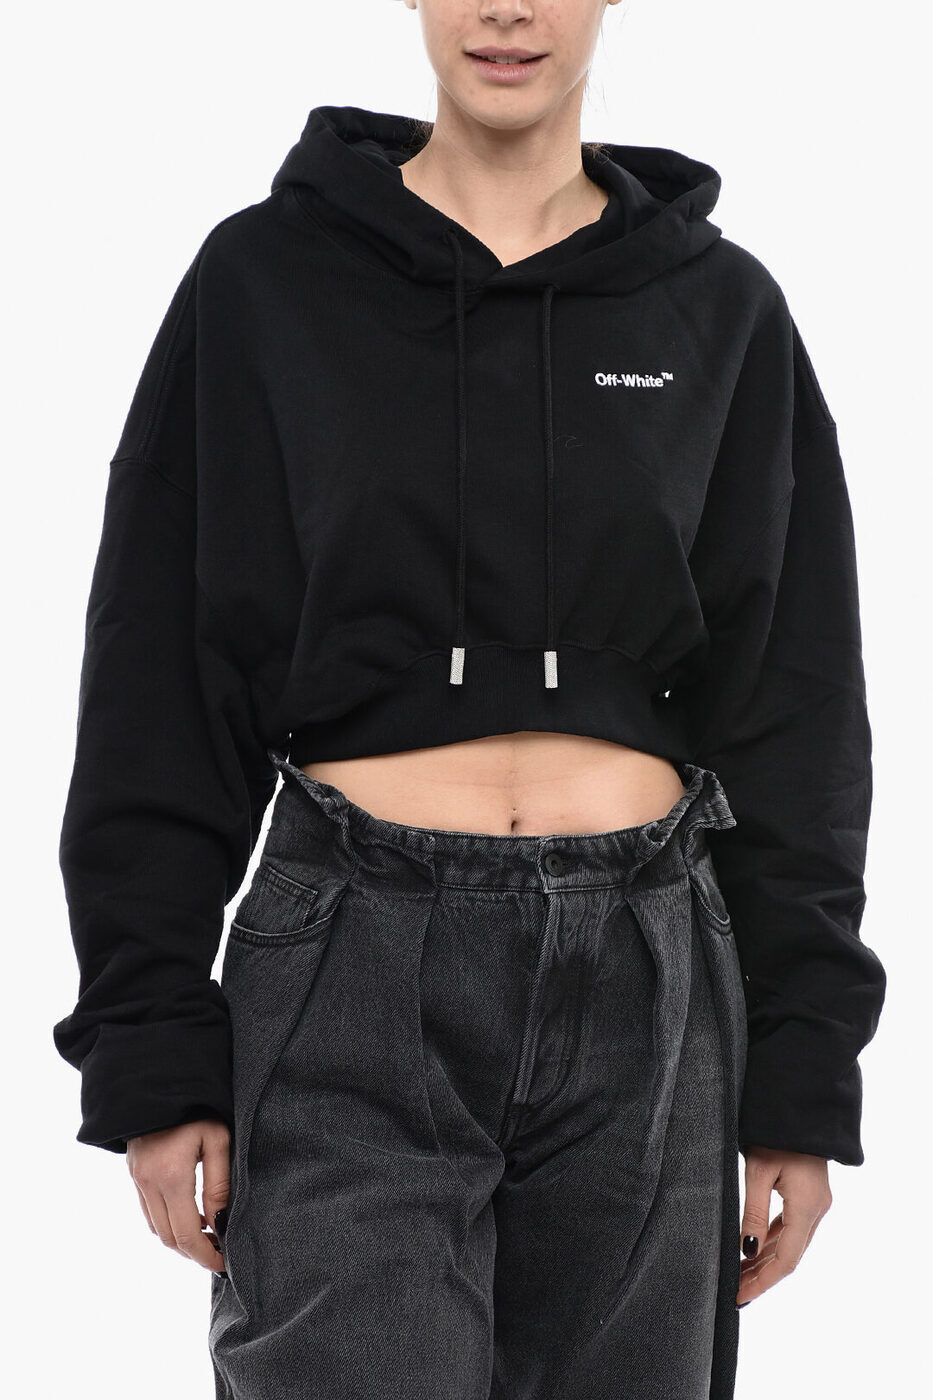 OFF WHITE オフホワイト トレーナー OWBB050C99JER0021001 レディース BRUSHED COTTON CROPPED FOR ALL HOODIE 【関税・送料無料】【ラッピング無料】 dk